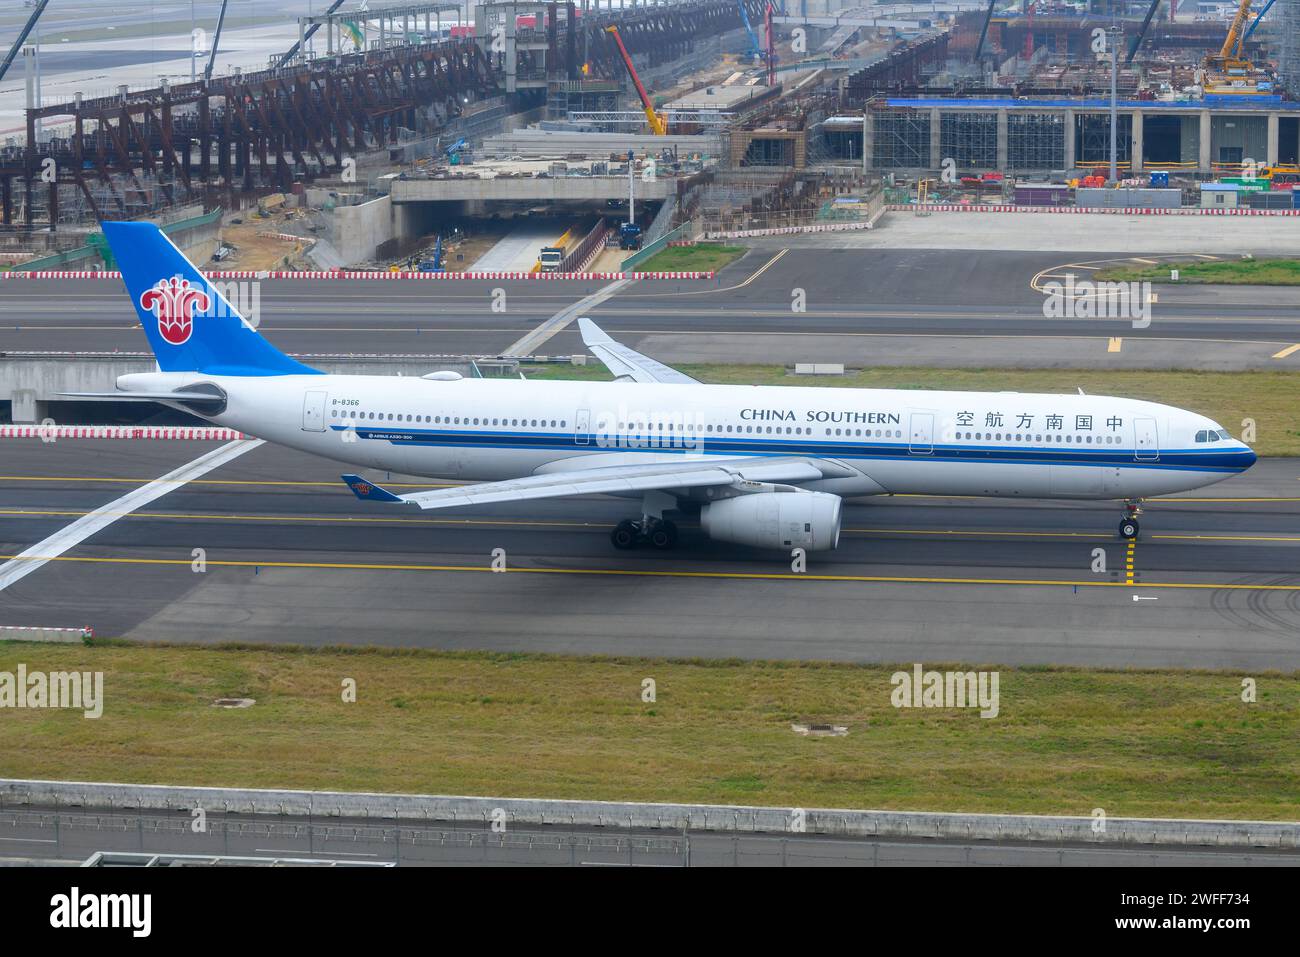 China Southern Airlines Airbus A330-300 aircraft taxiing. Airplane A330 of China Southern airline. Stock Photo